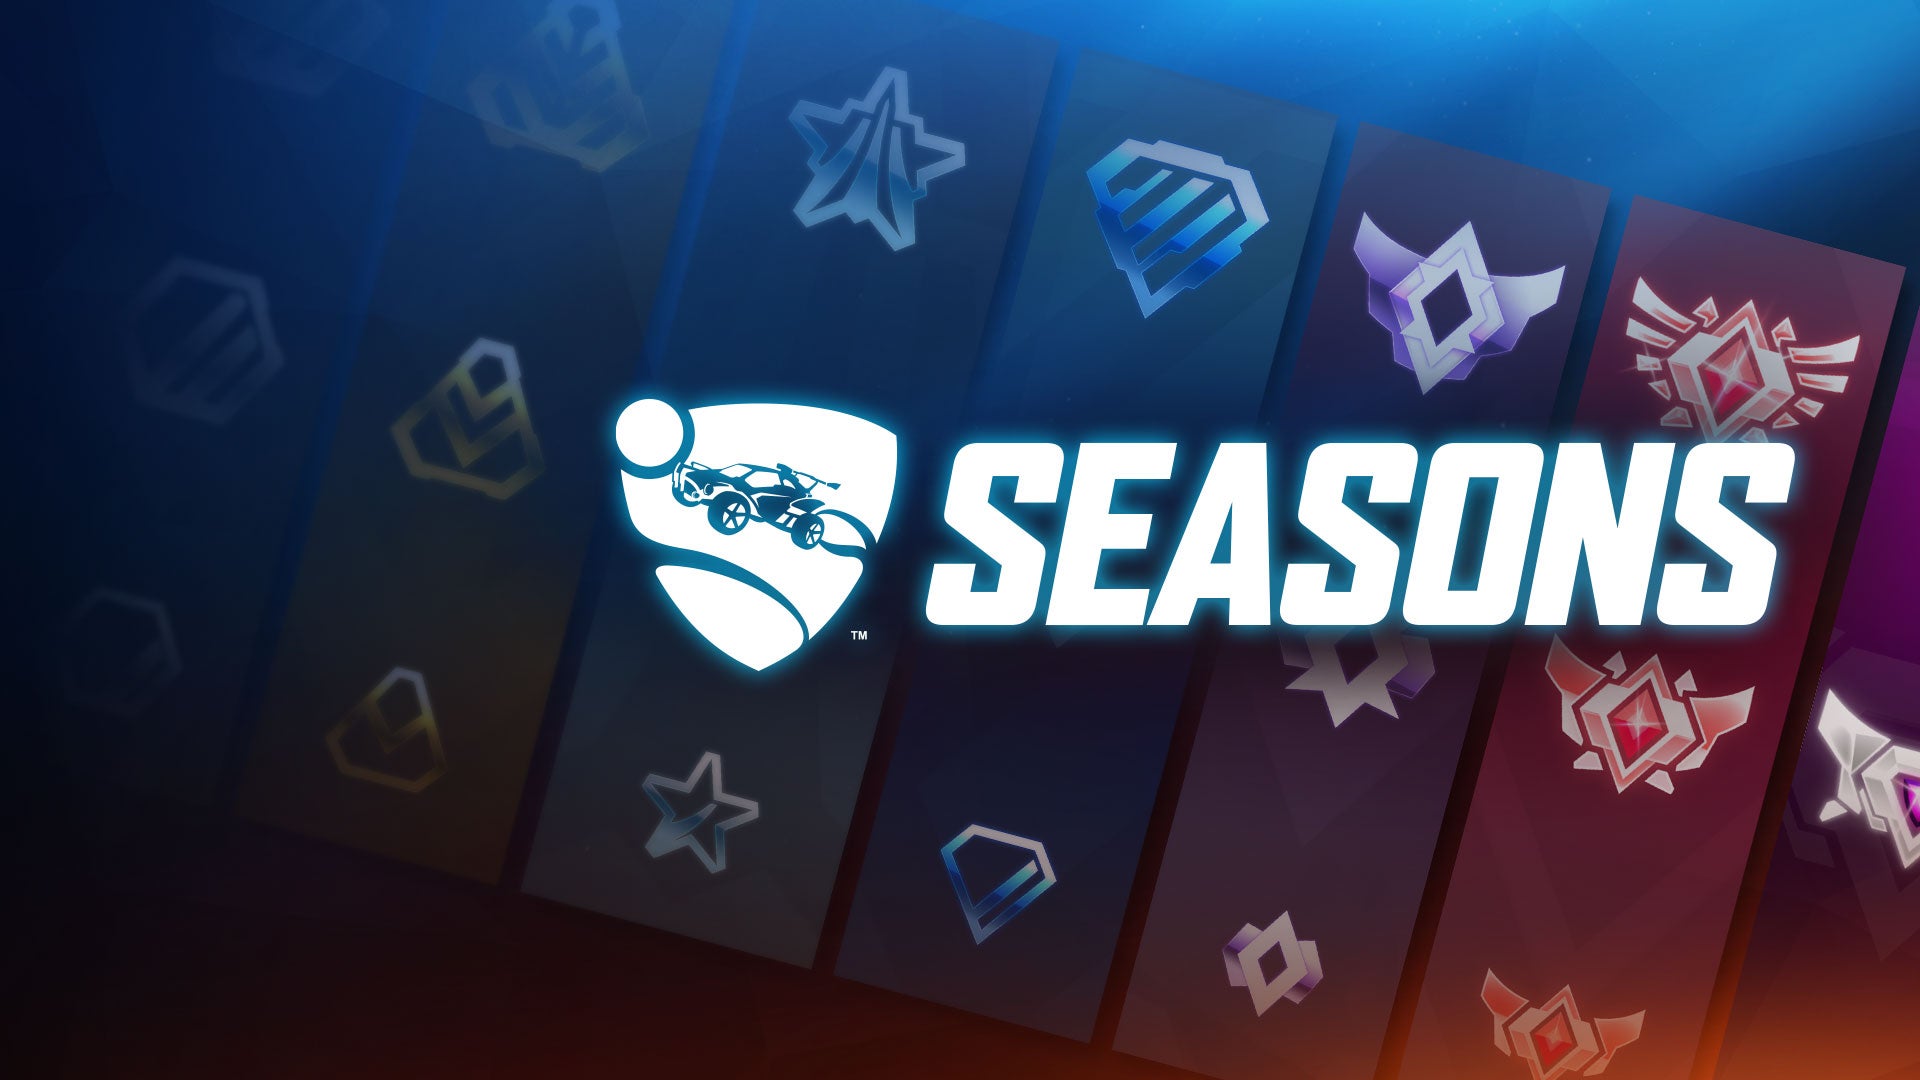 Rocket League Free To Play: Seasons, New Ranks, And More Image